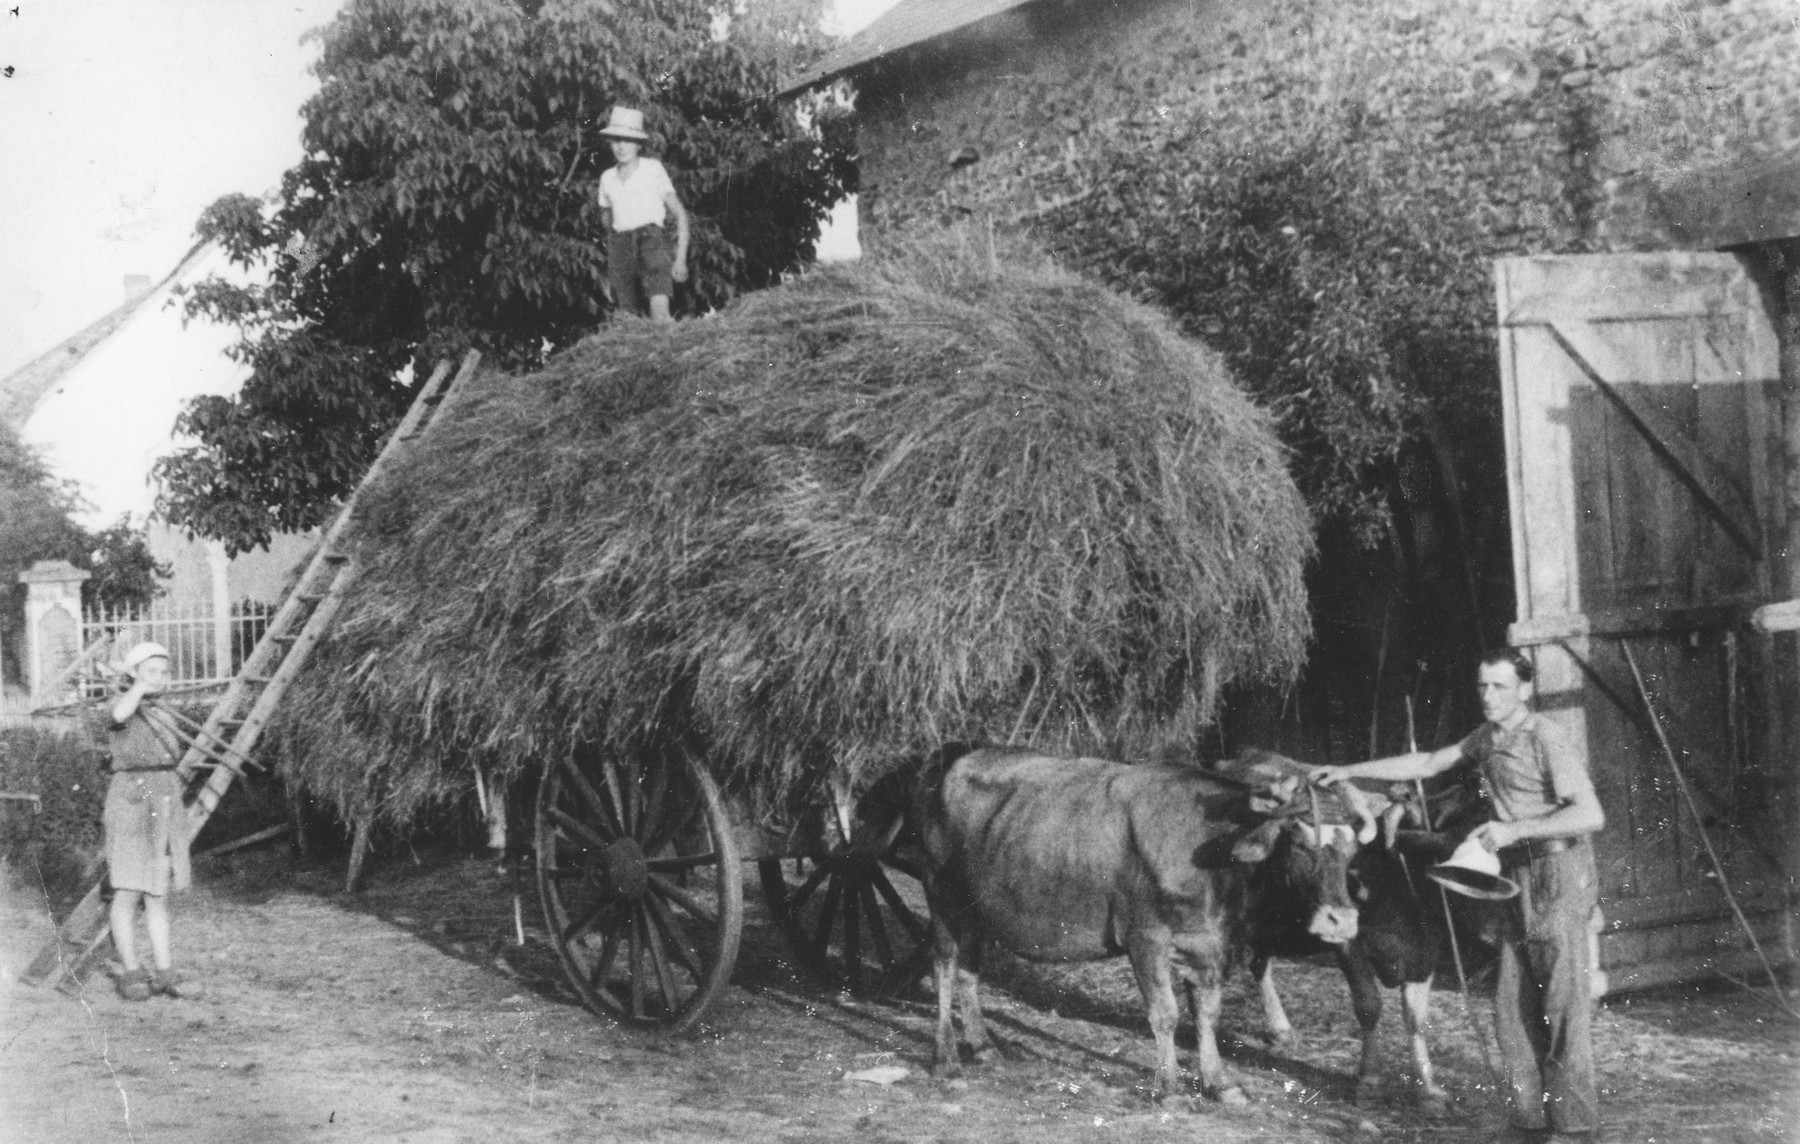 Ingeborg Haas, a Jewish refugee living at the Chabannes children's home, helps load a hay wagon at the farm where she worked near the home.